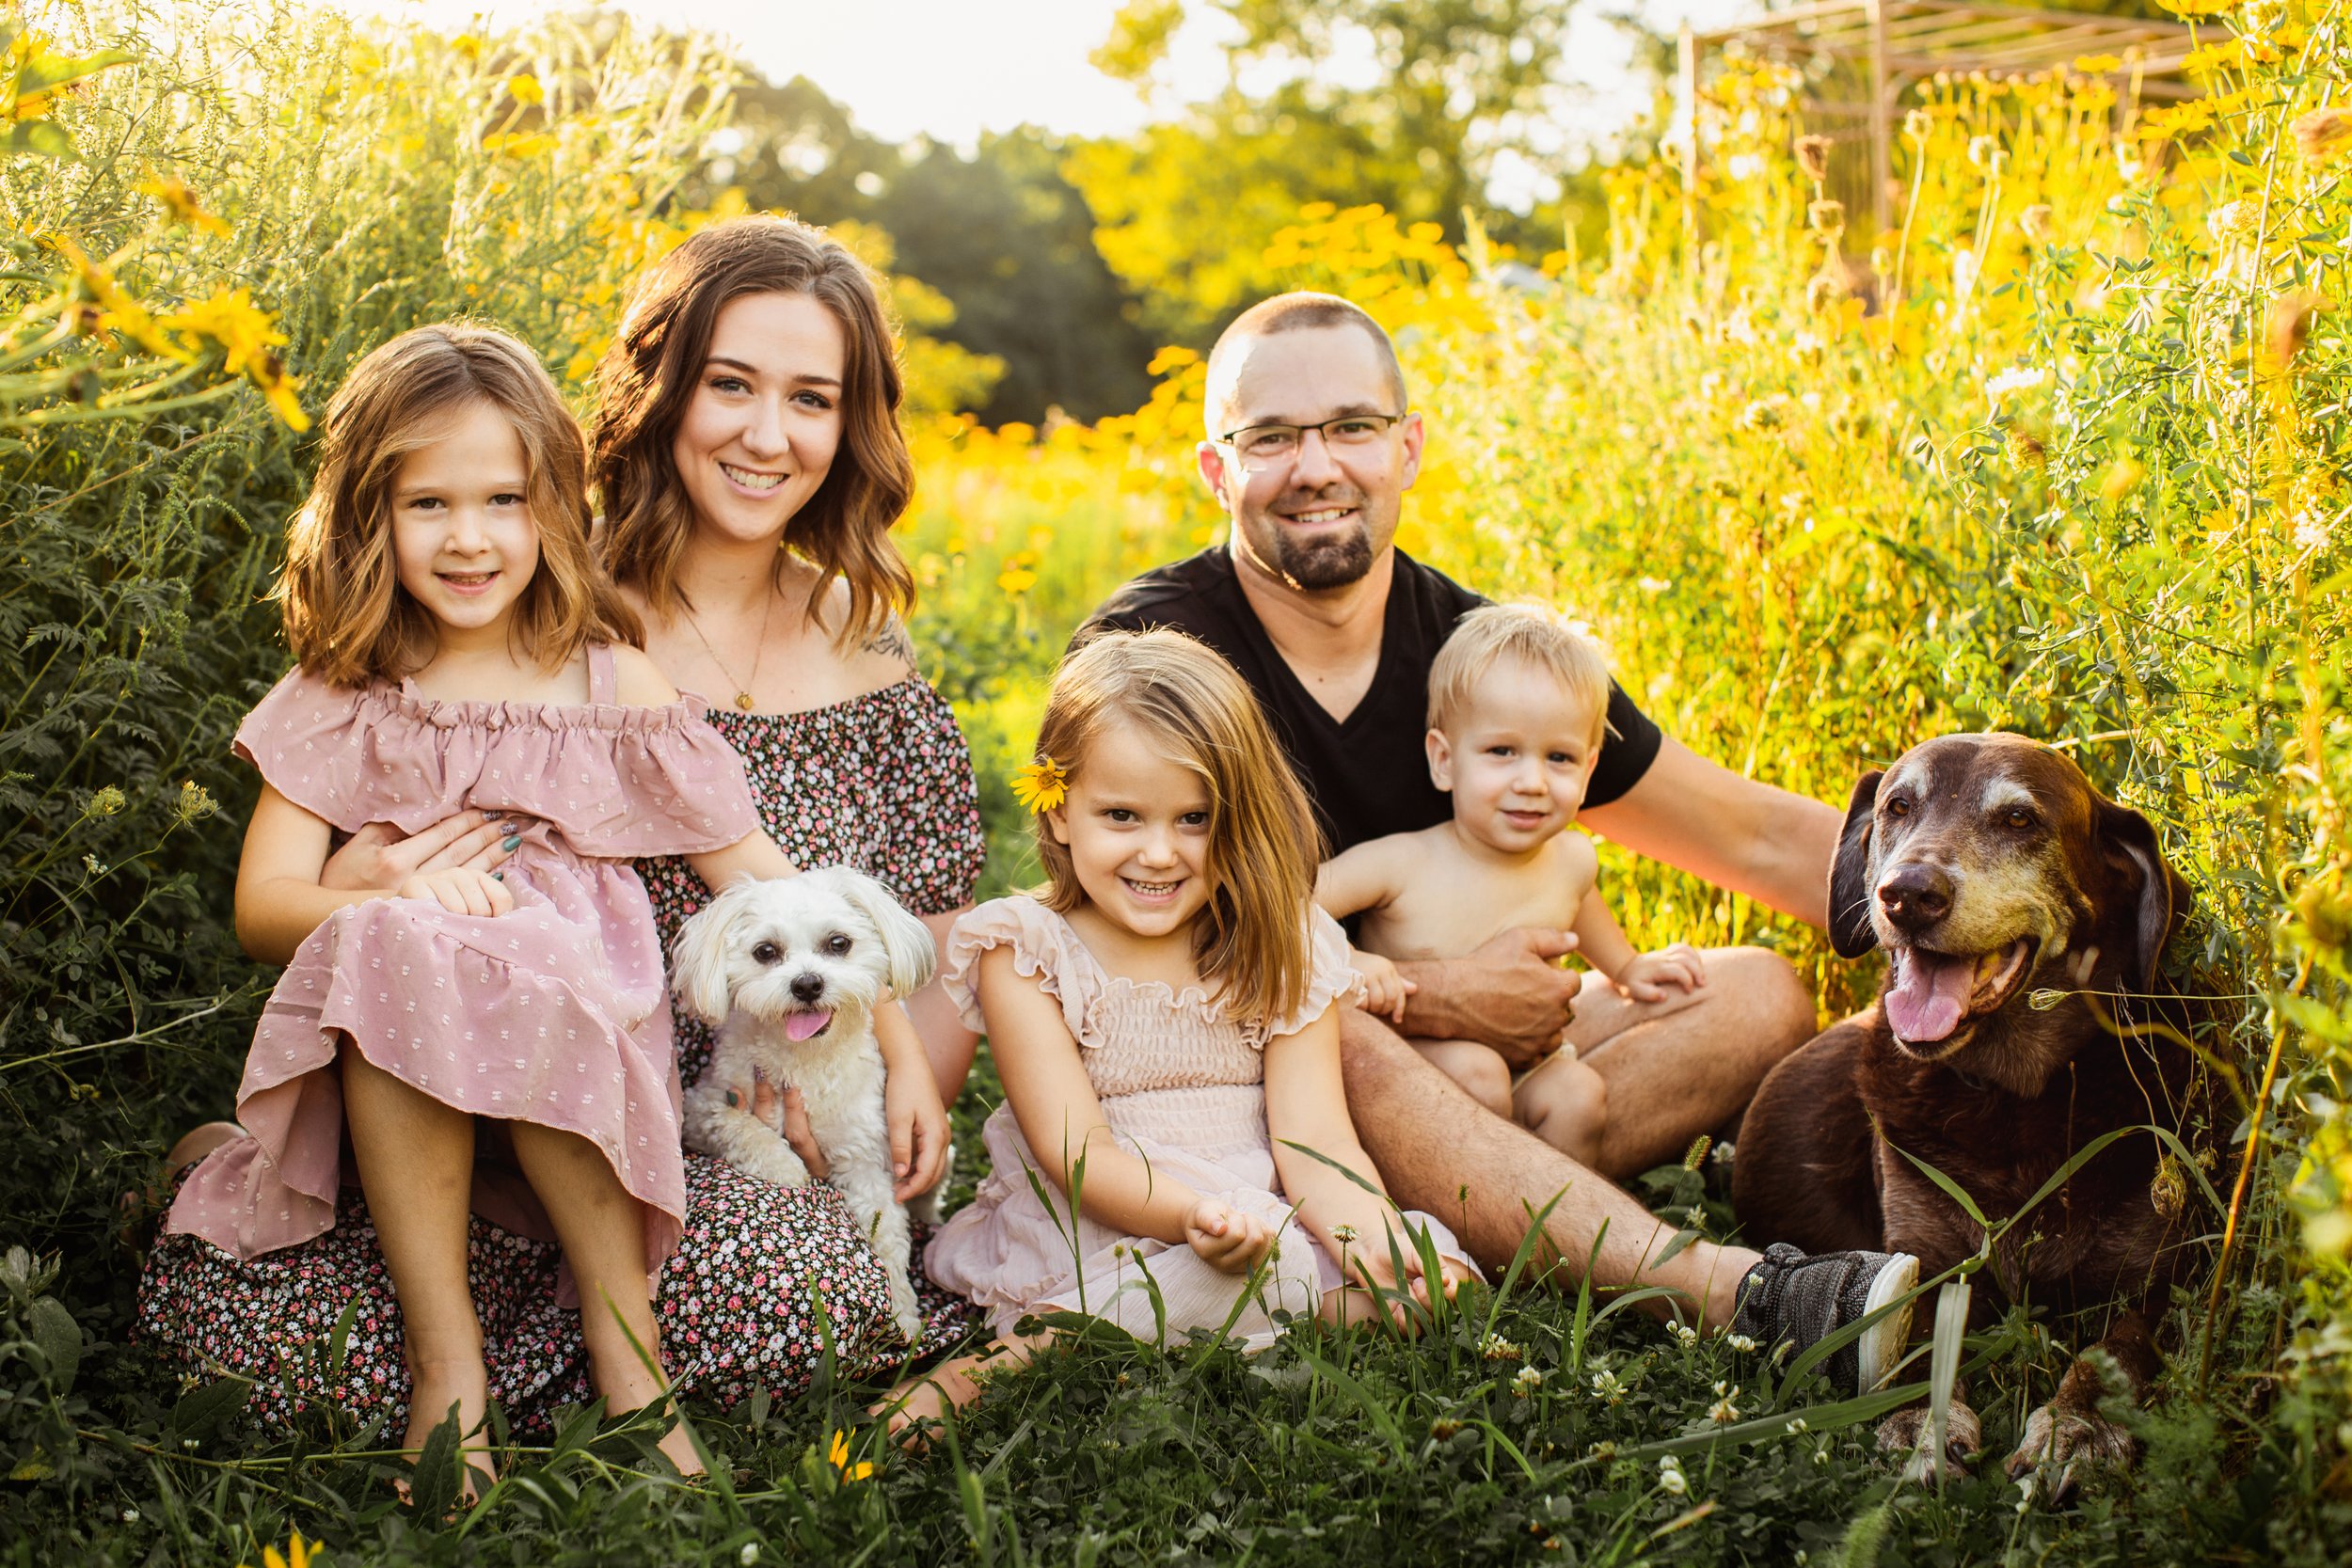  Family portrait with a young family with three kids and two dogs in yellow flowers by Teala Ward Photography. family with dogs #TealaWardPhotography #TealaWardFamilies #IllinoisRiverPhotography #IllinoisFamilyPhotography #familylifestylepics 